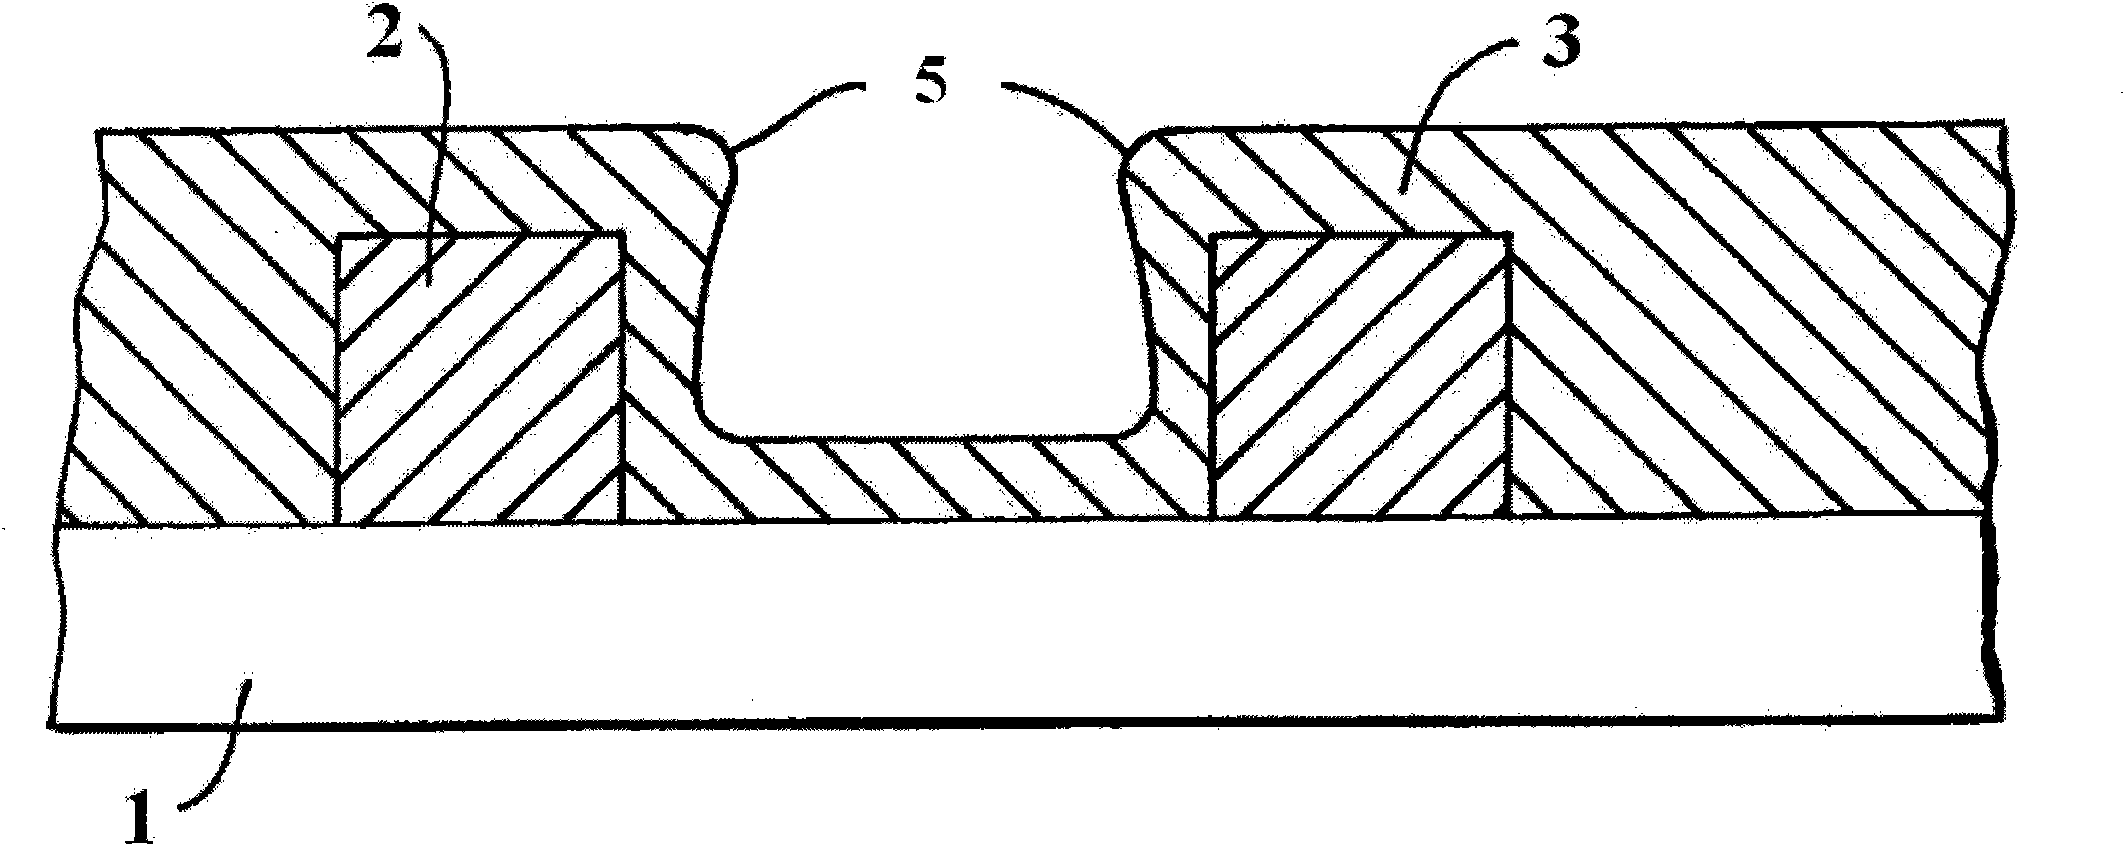 Silicon dioxide optical waveguide device based on B-Ge-codoped upper cladding and preparation method thereof